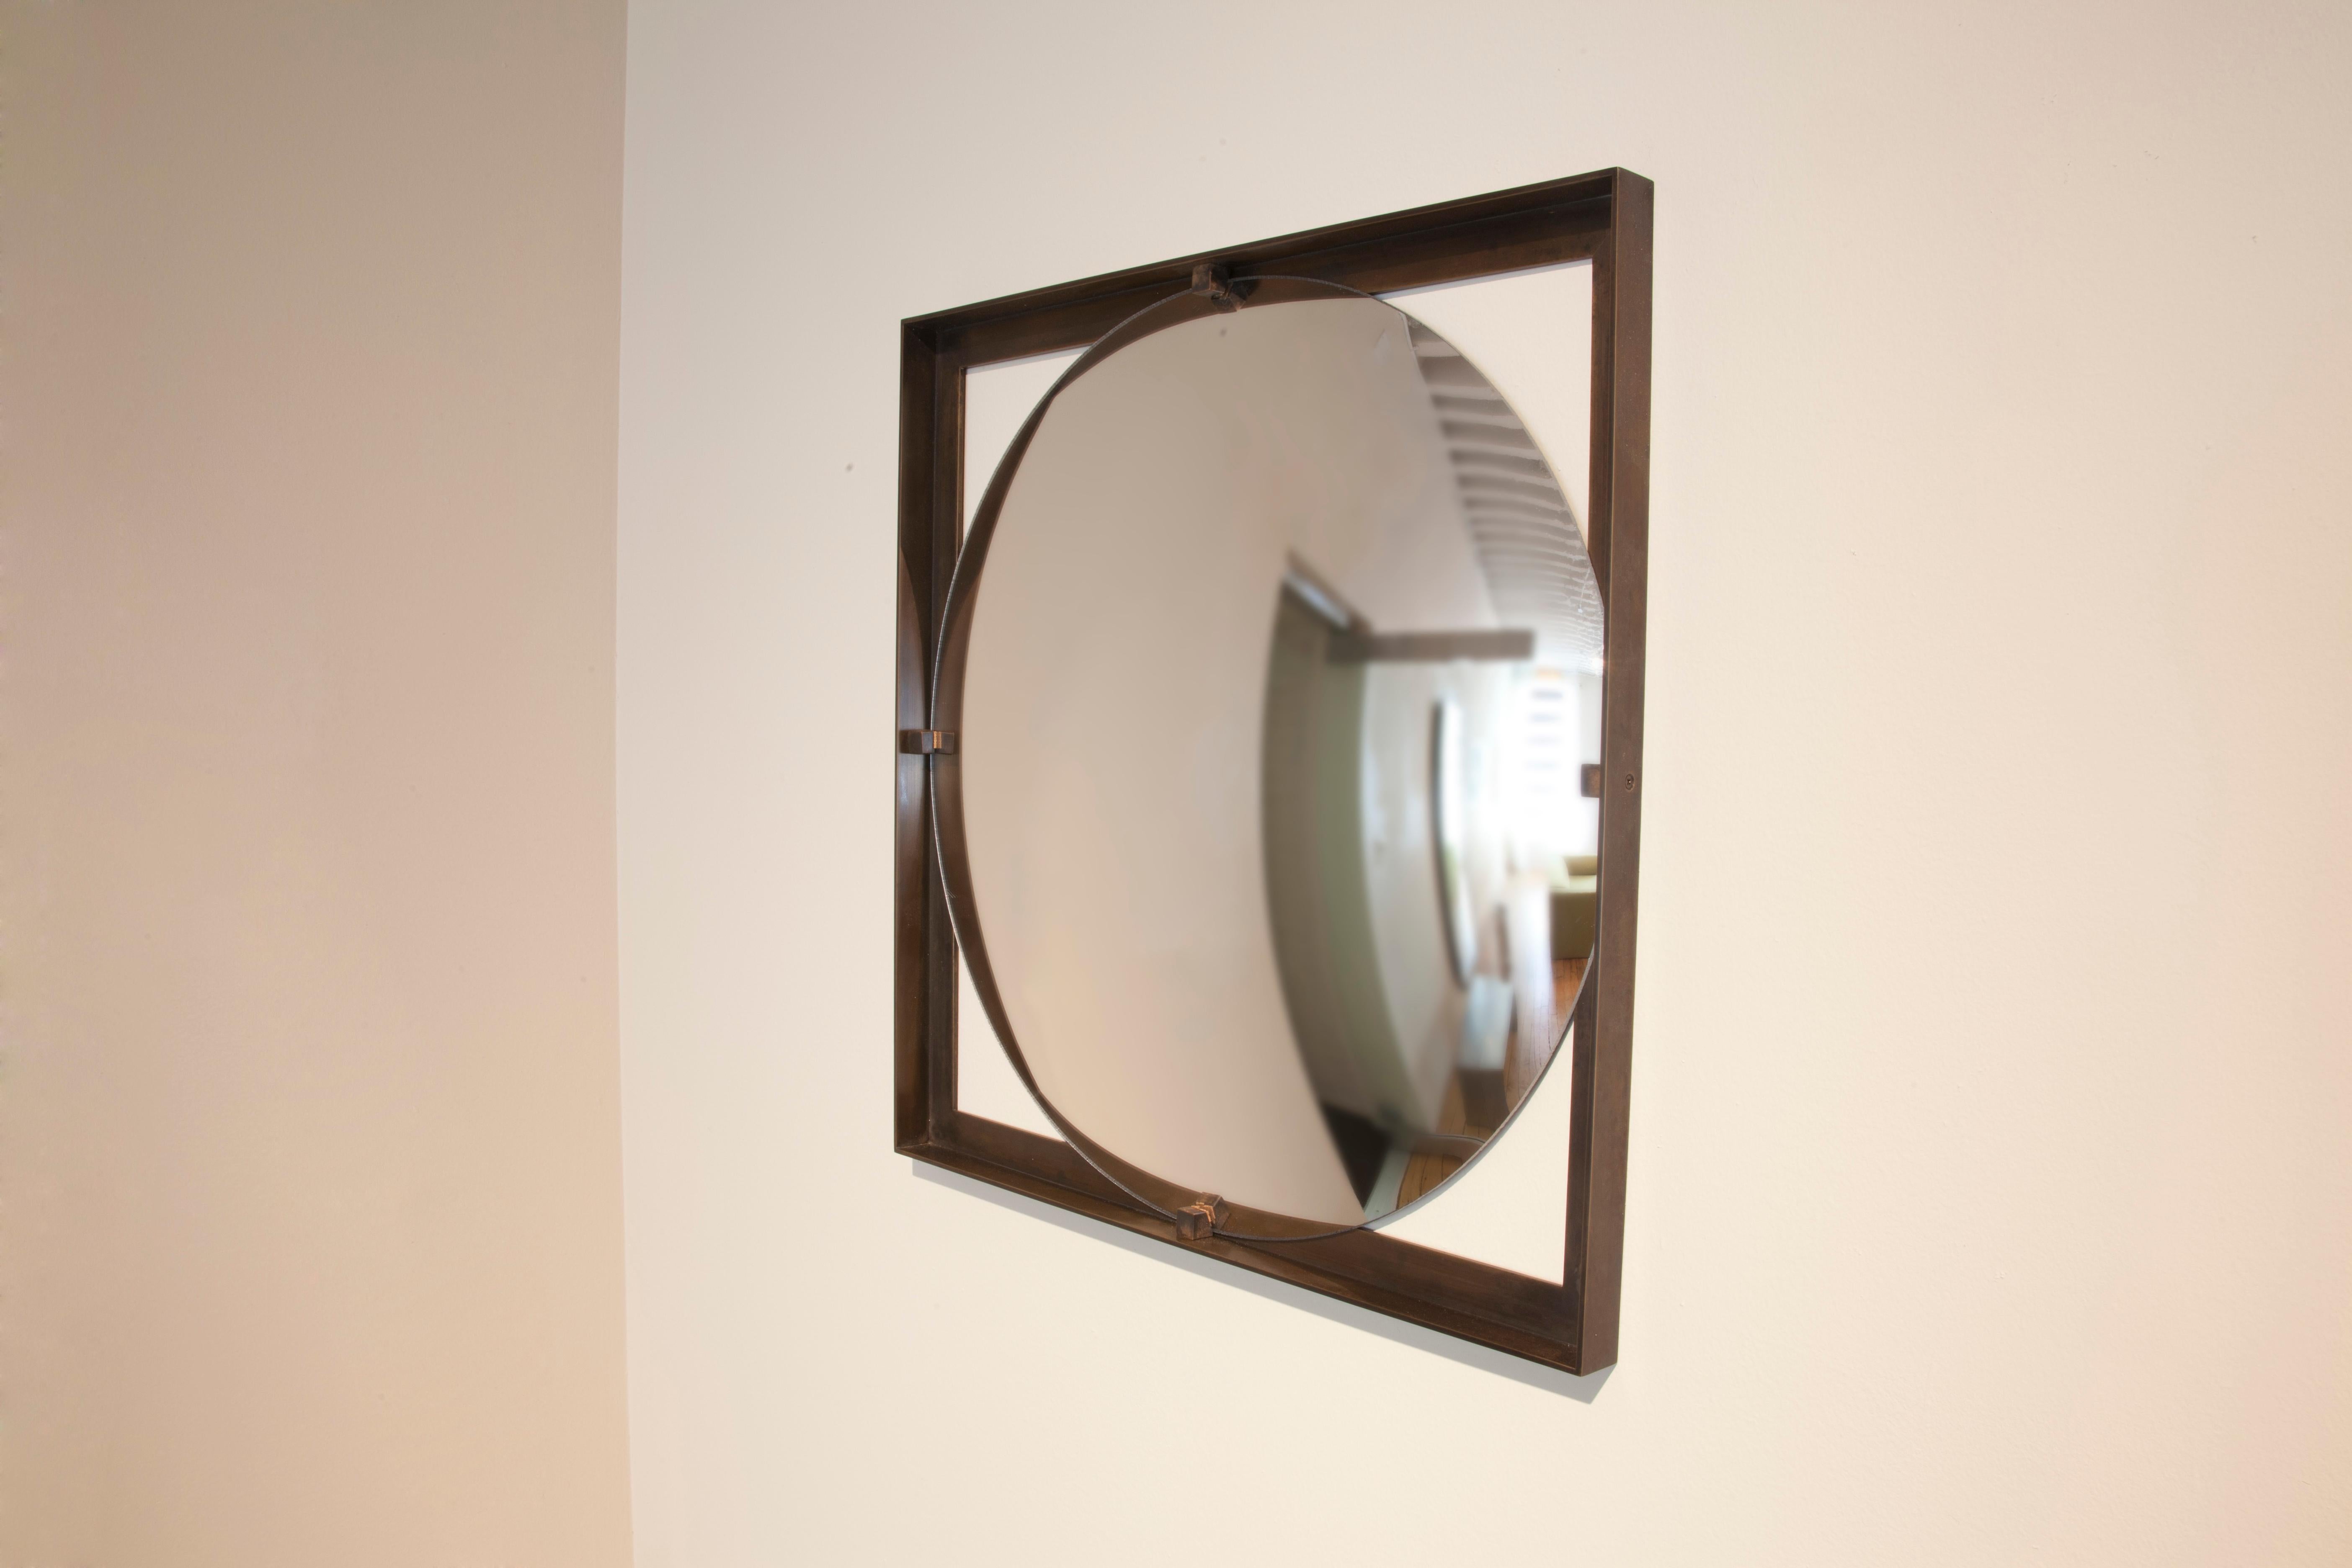 Galt convex mirror by Gentner Design
Dimensions: D 45.7 x H 2.5 cm
Materials: bronze, mirror
Available in 2 sizes: D45.7cm, D91.4cm.

Gentner Design
Rooted in a language of sculpture, character defining details, and world renowned craftsmanship, the